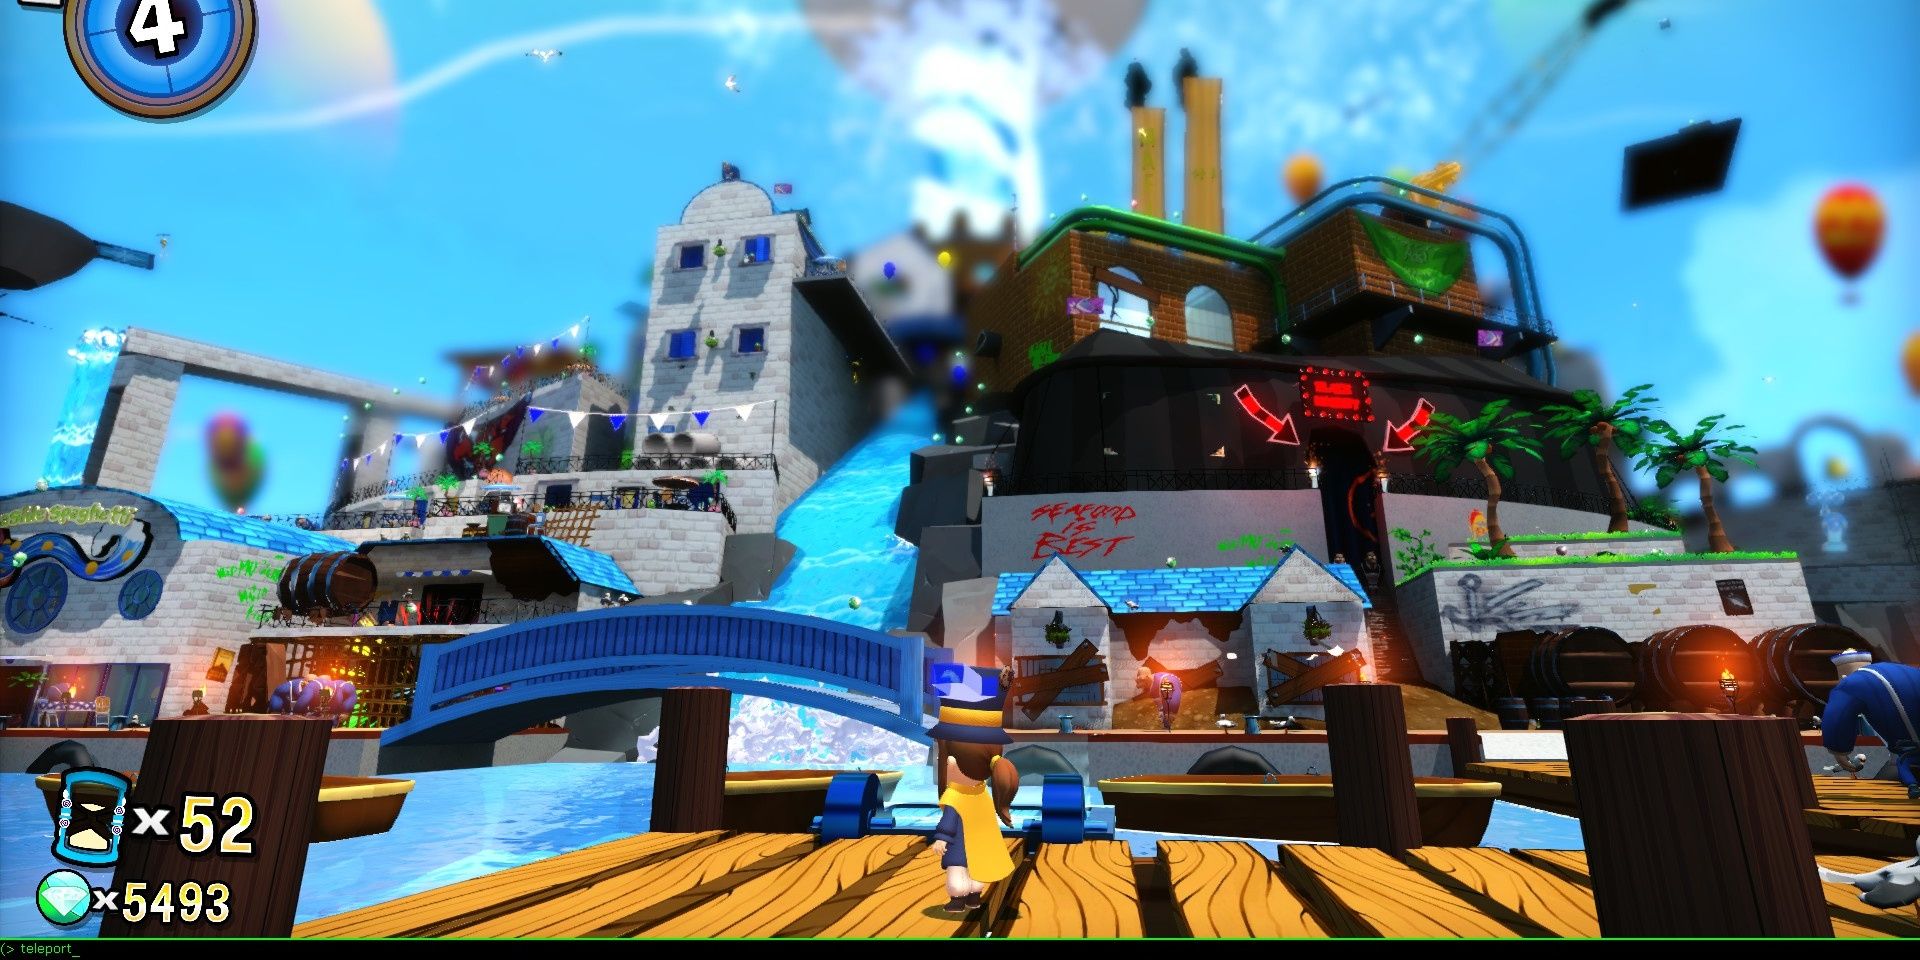 A view from the distance of Mafia Town as player inputs teleport command in A Hat In Time